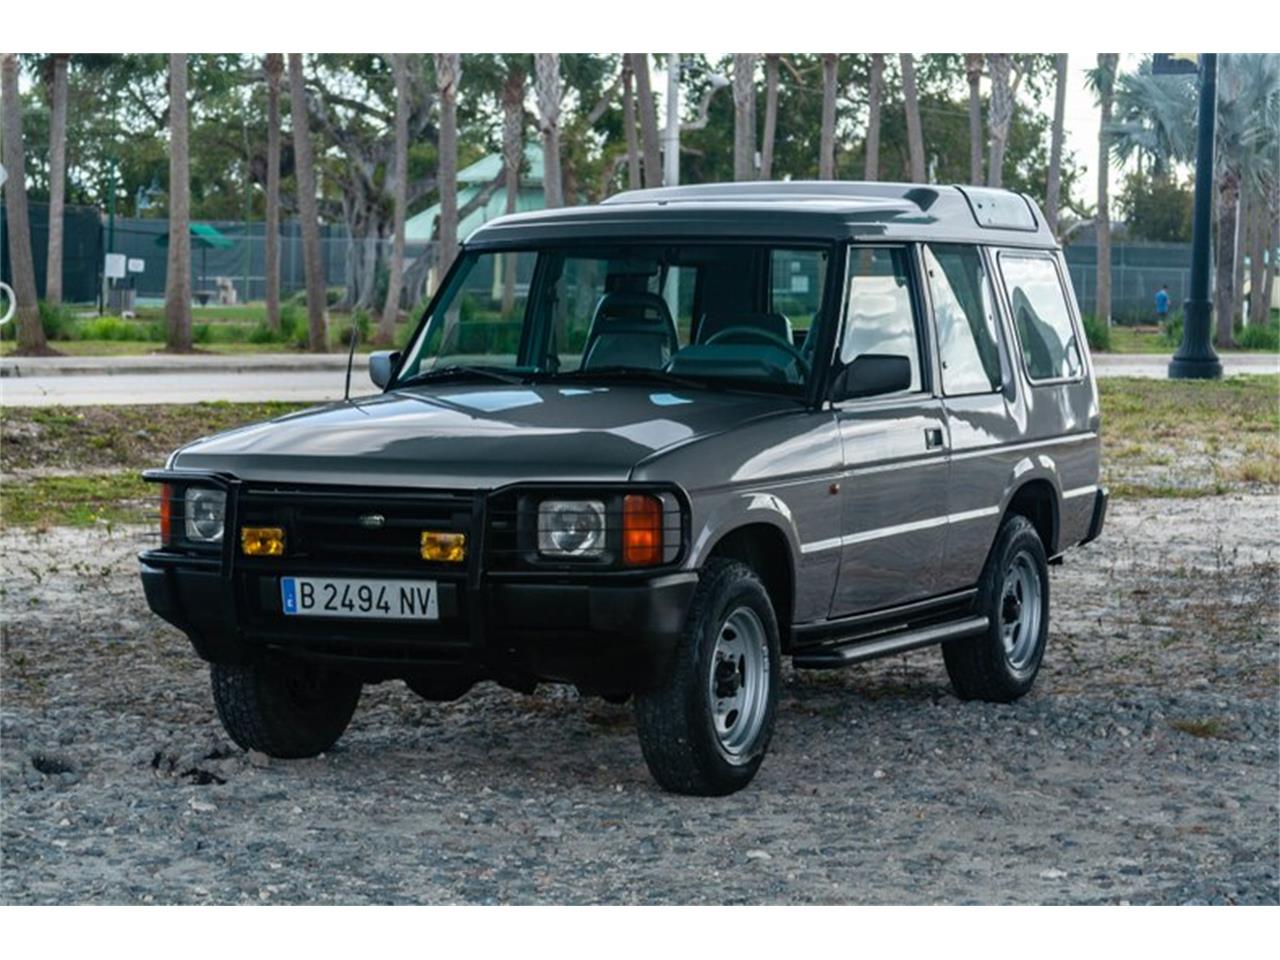 1992 Land Rover Discovery for sale in Delray Beach, FL / classiccarsbay.com